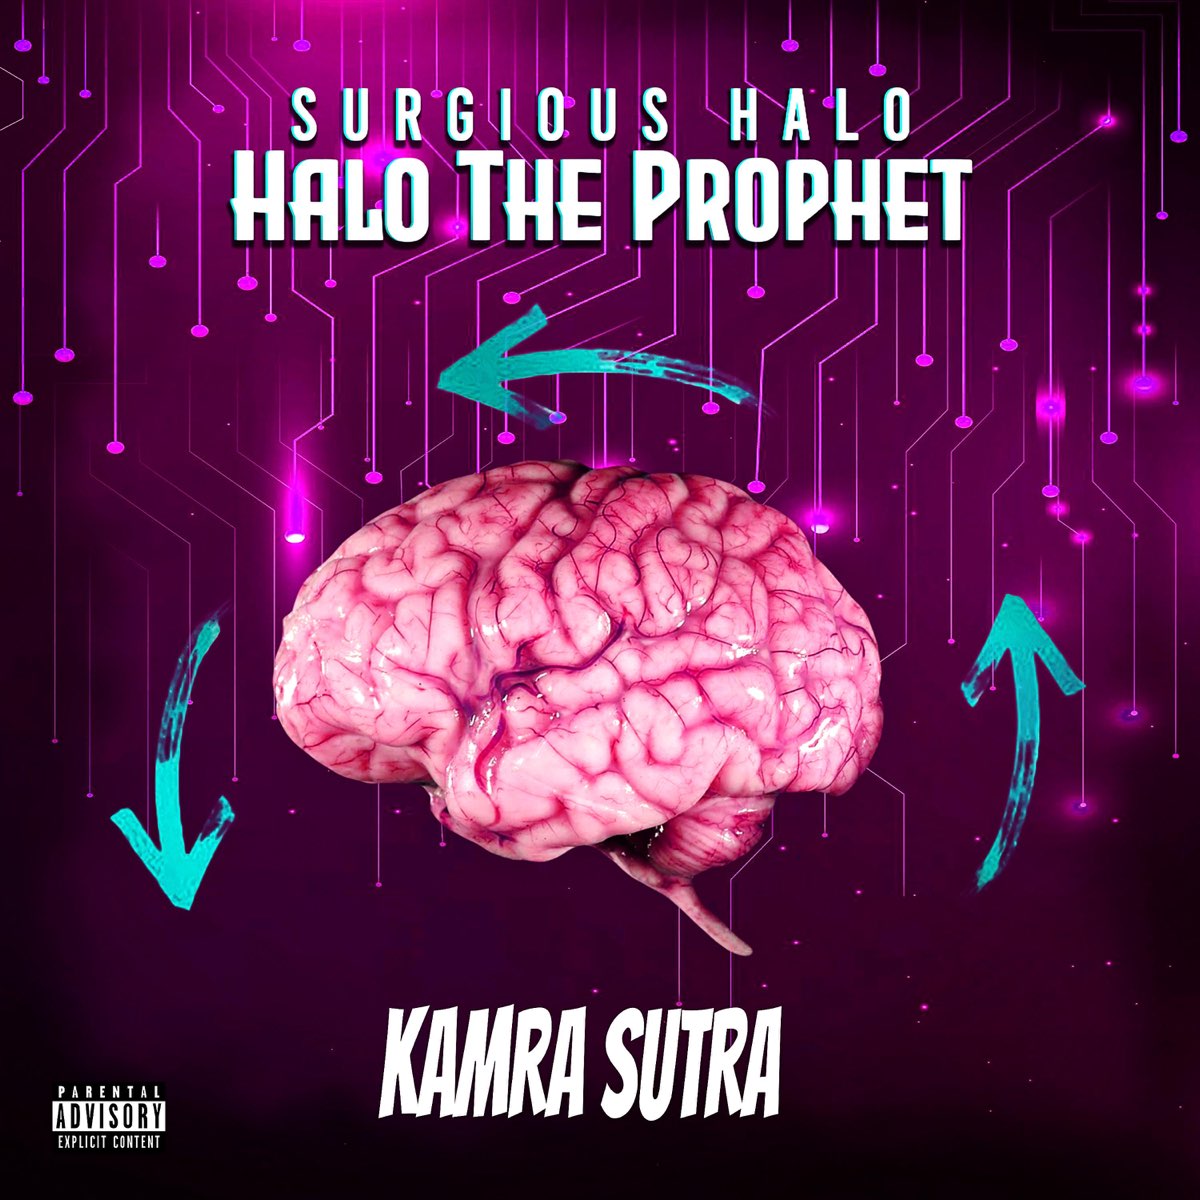 Karma Sutra by Surgious Halo The Prophet on Apple Music